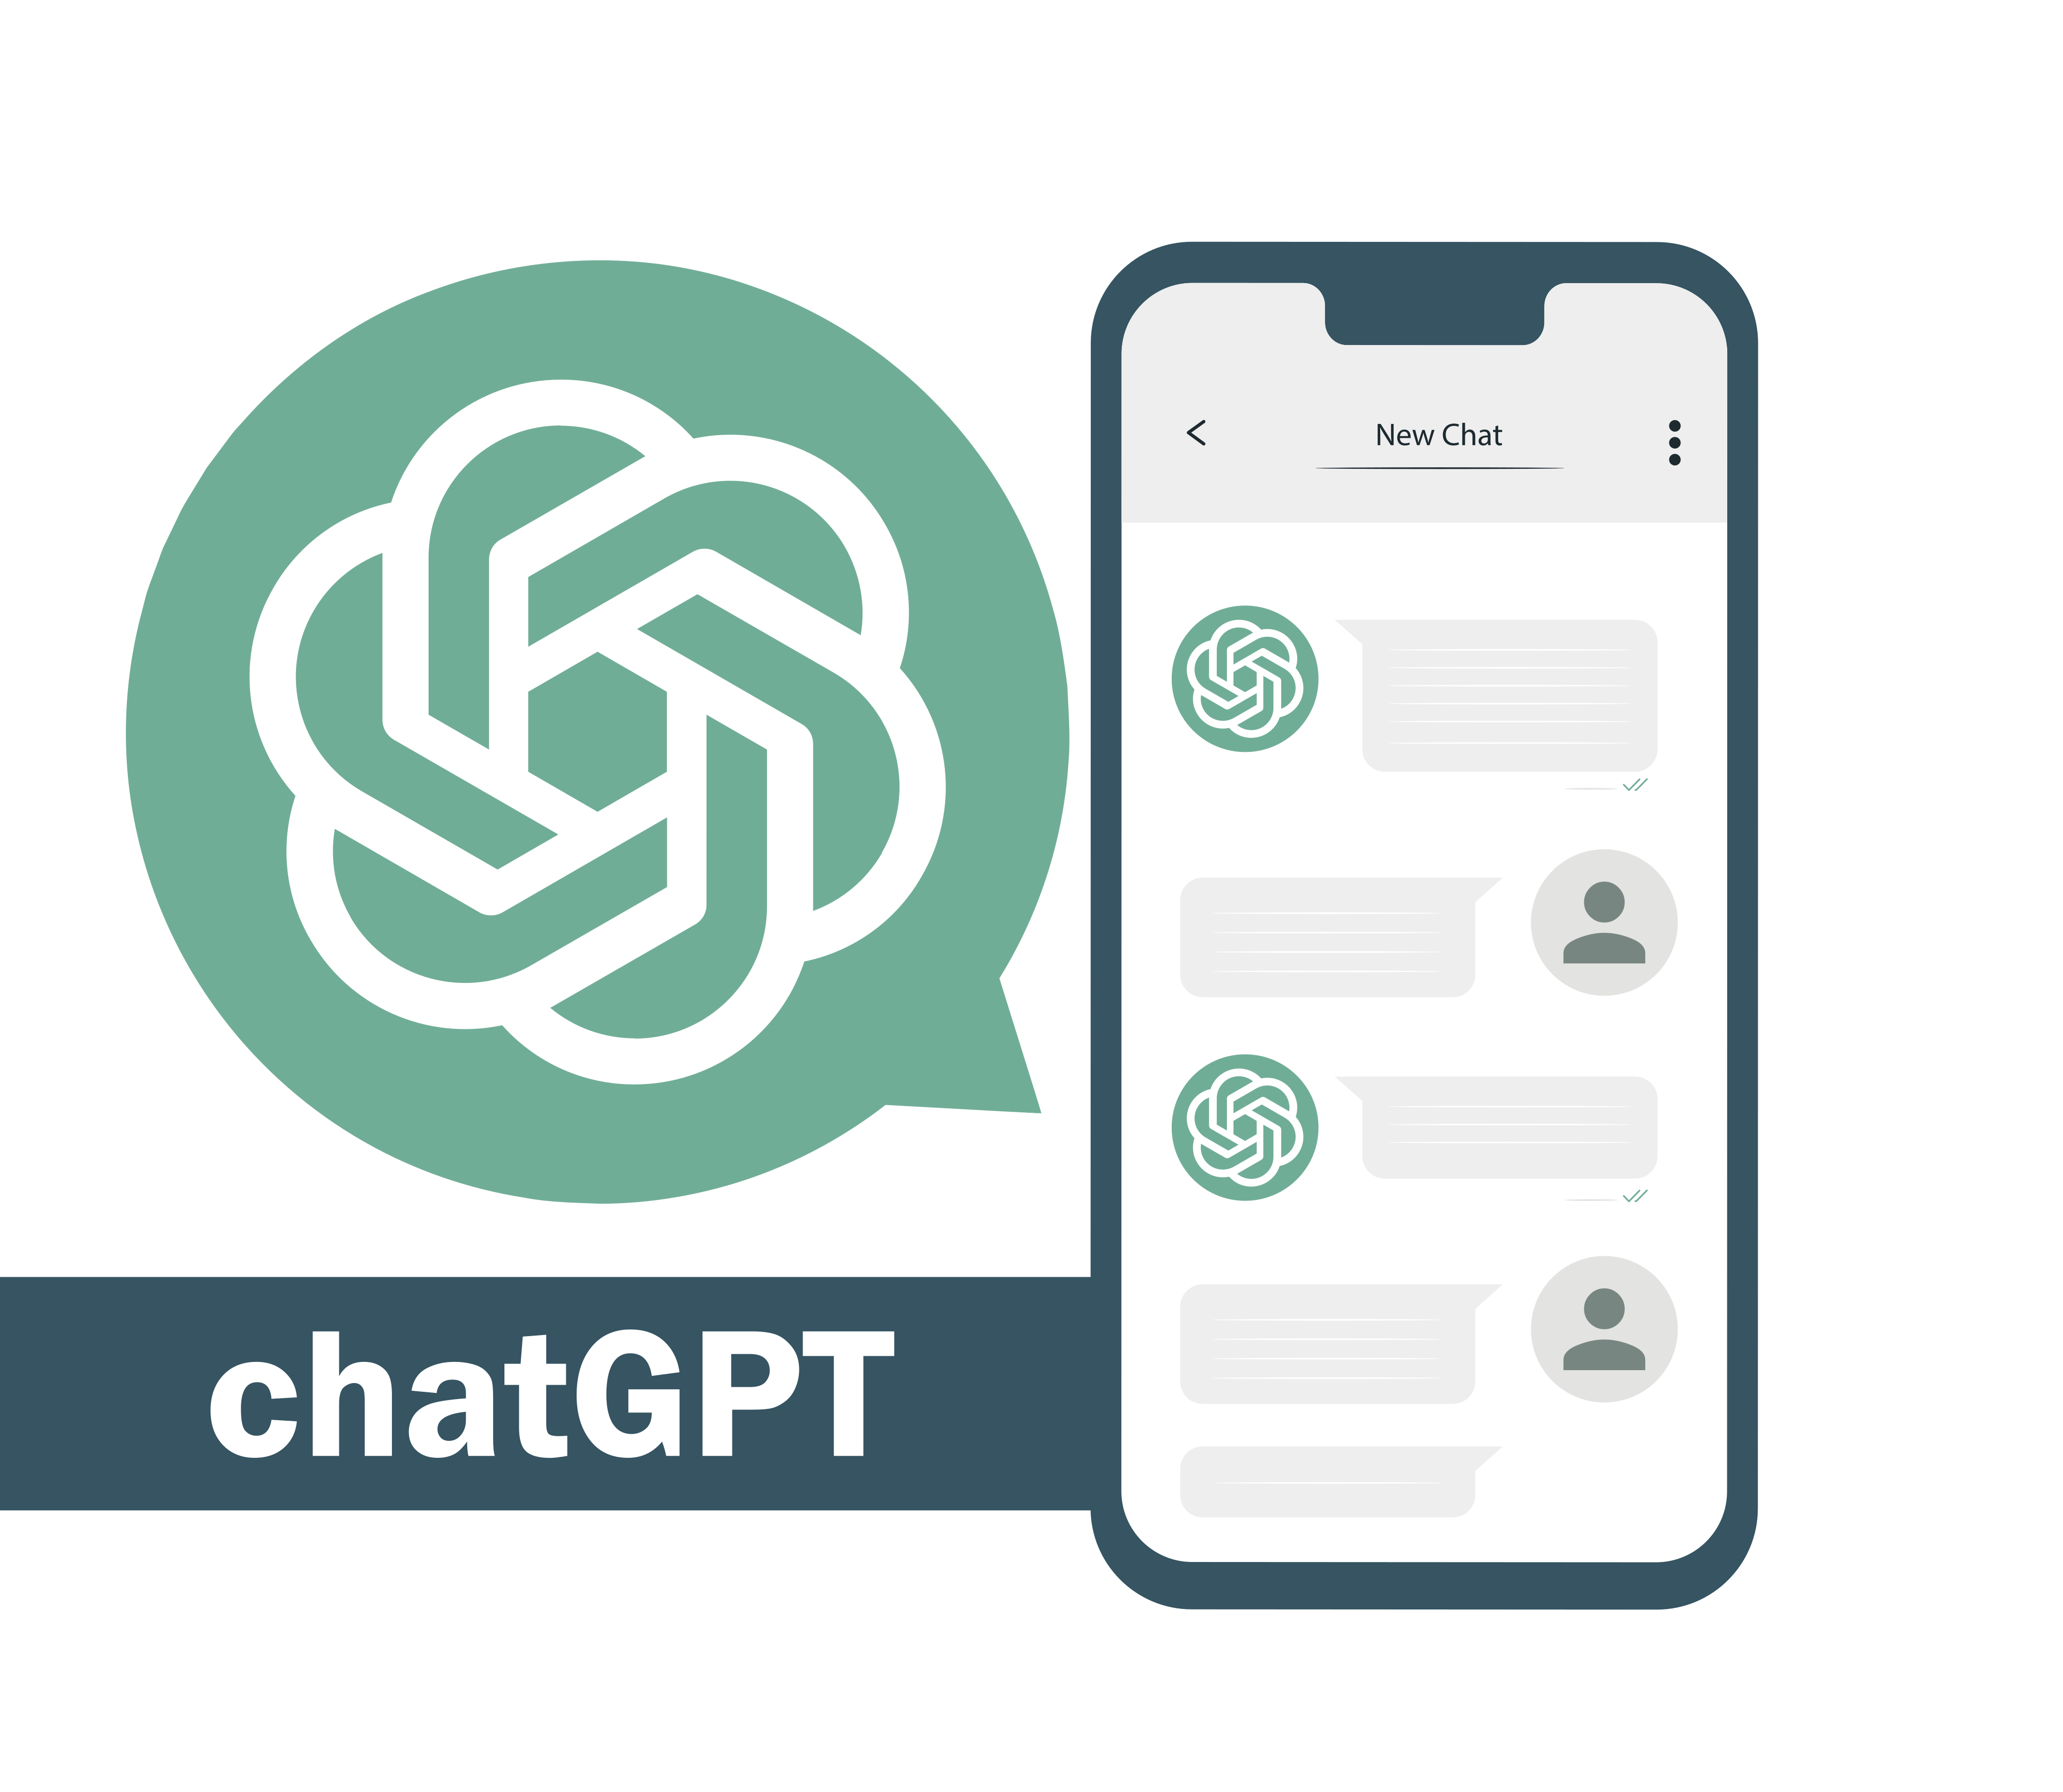 chat-gpt-logo-with-mobile-phone